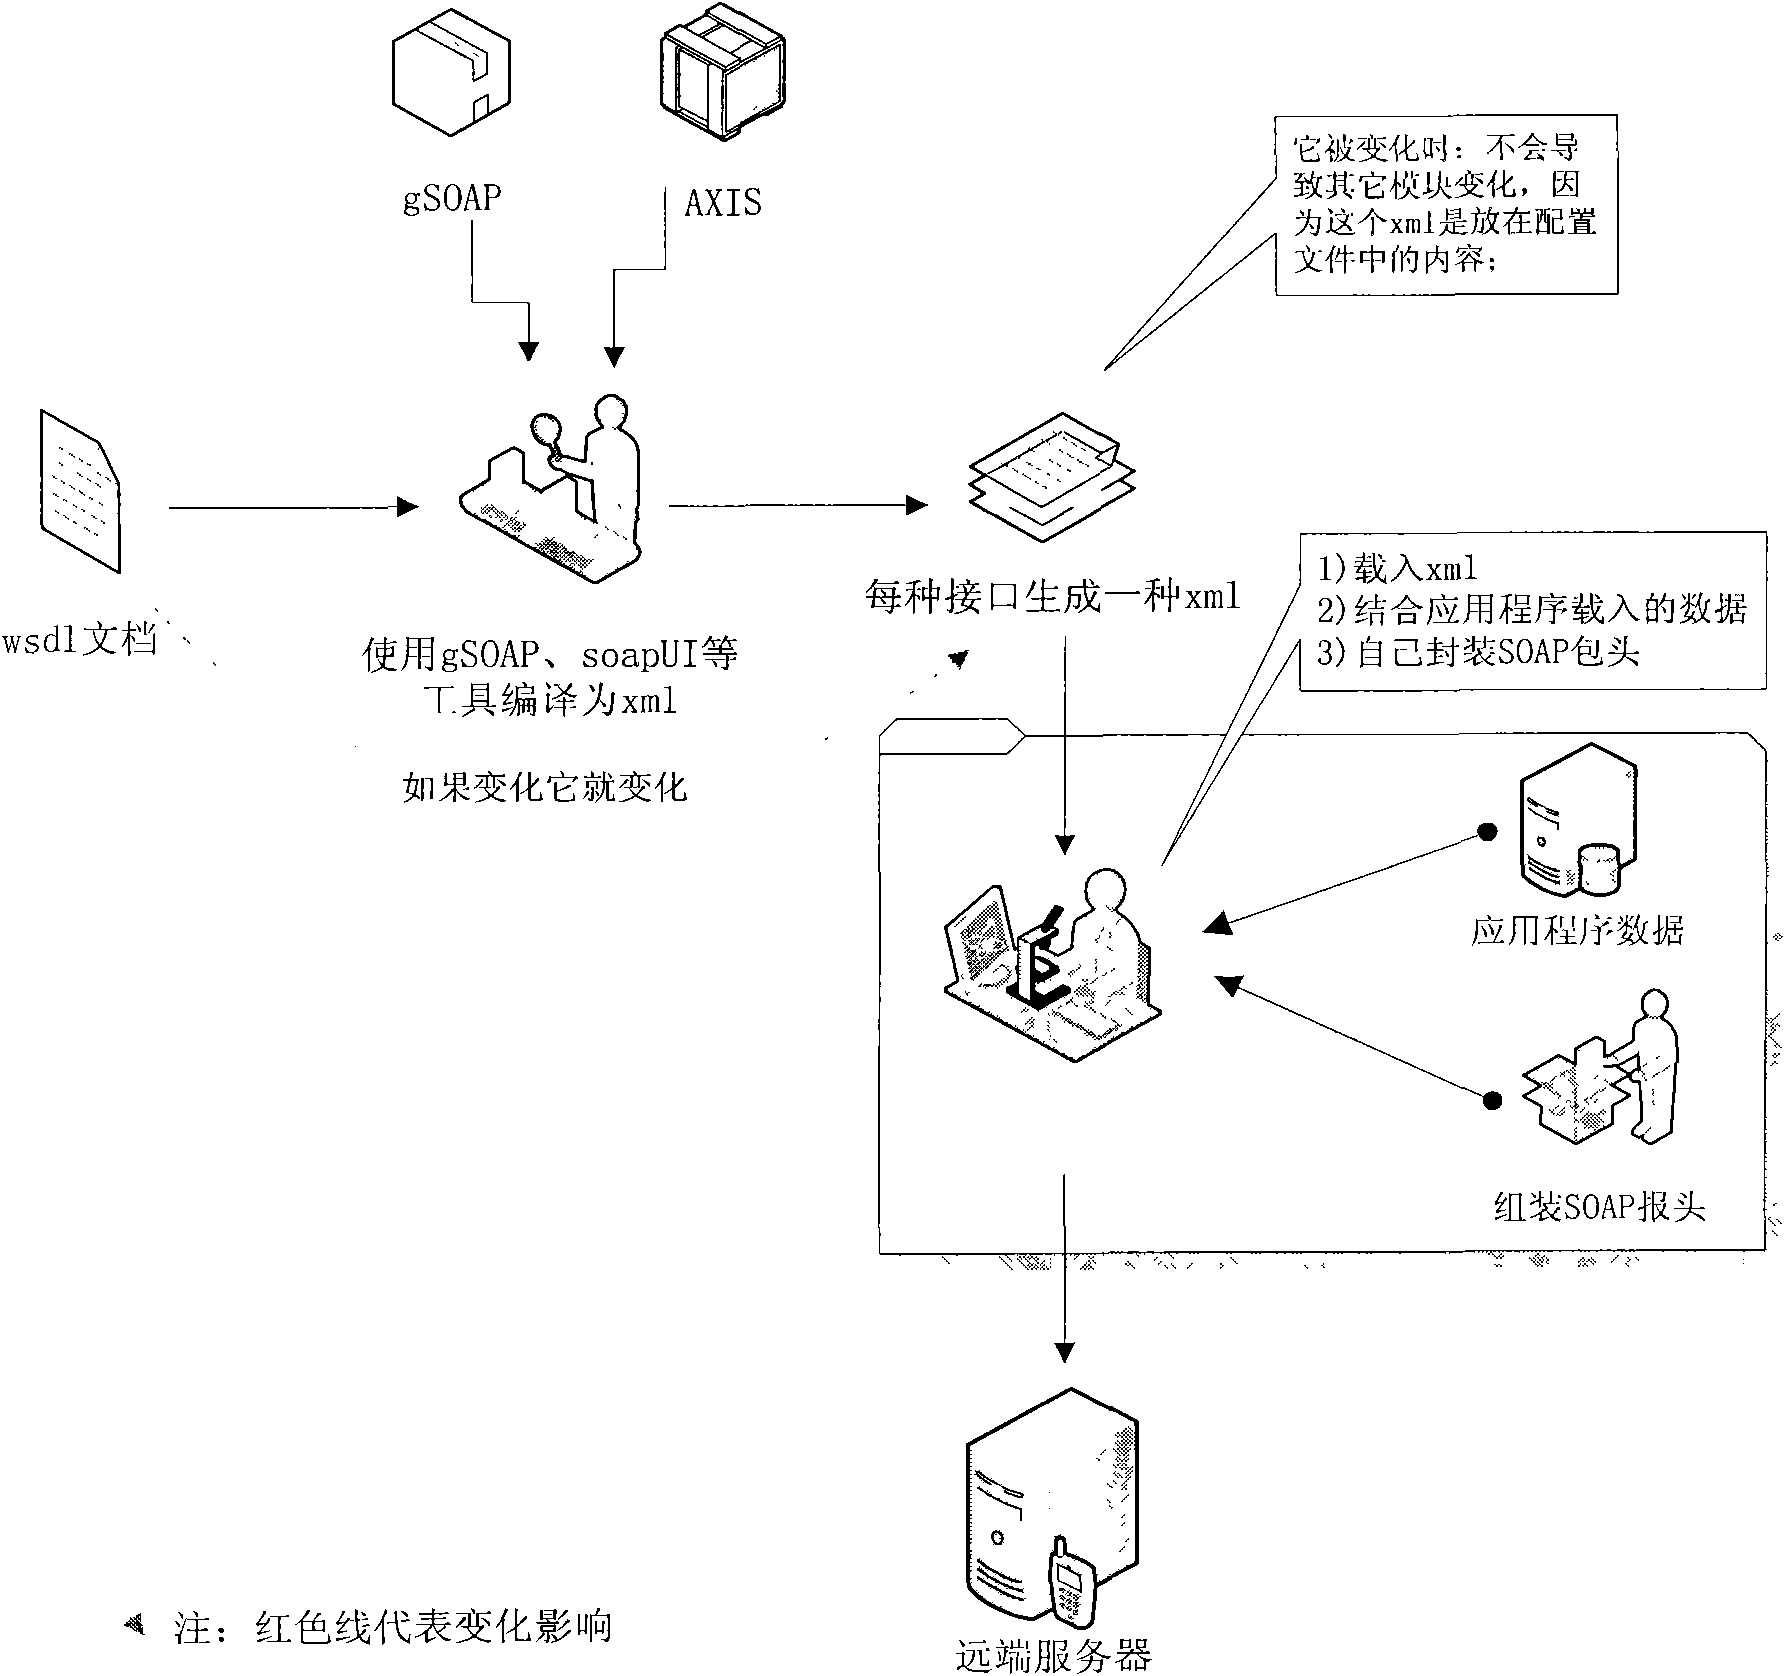 SOAP client protocol encapsulating method based on TCP short connection